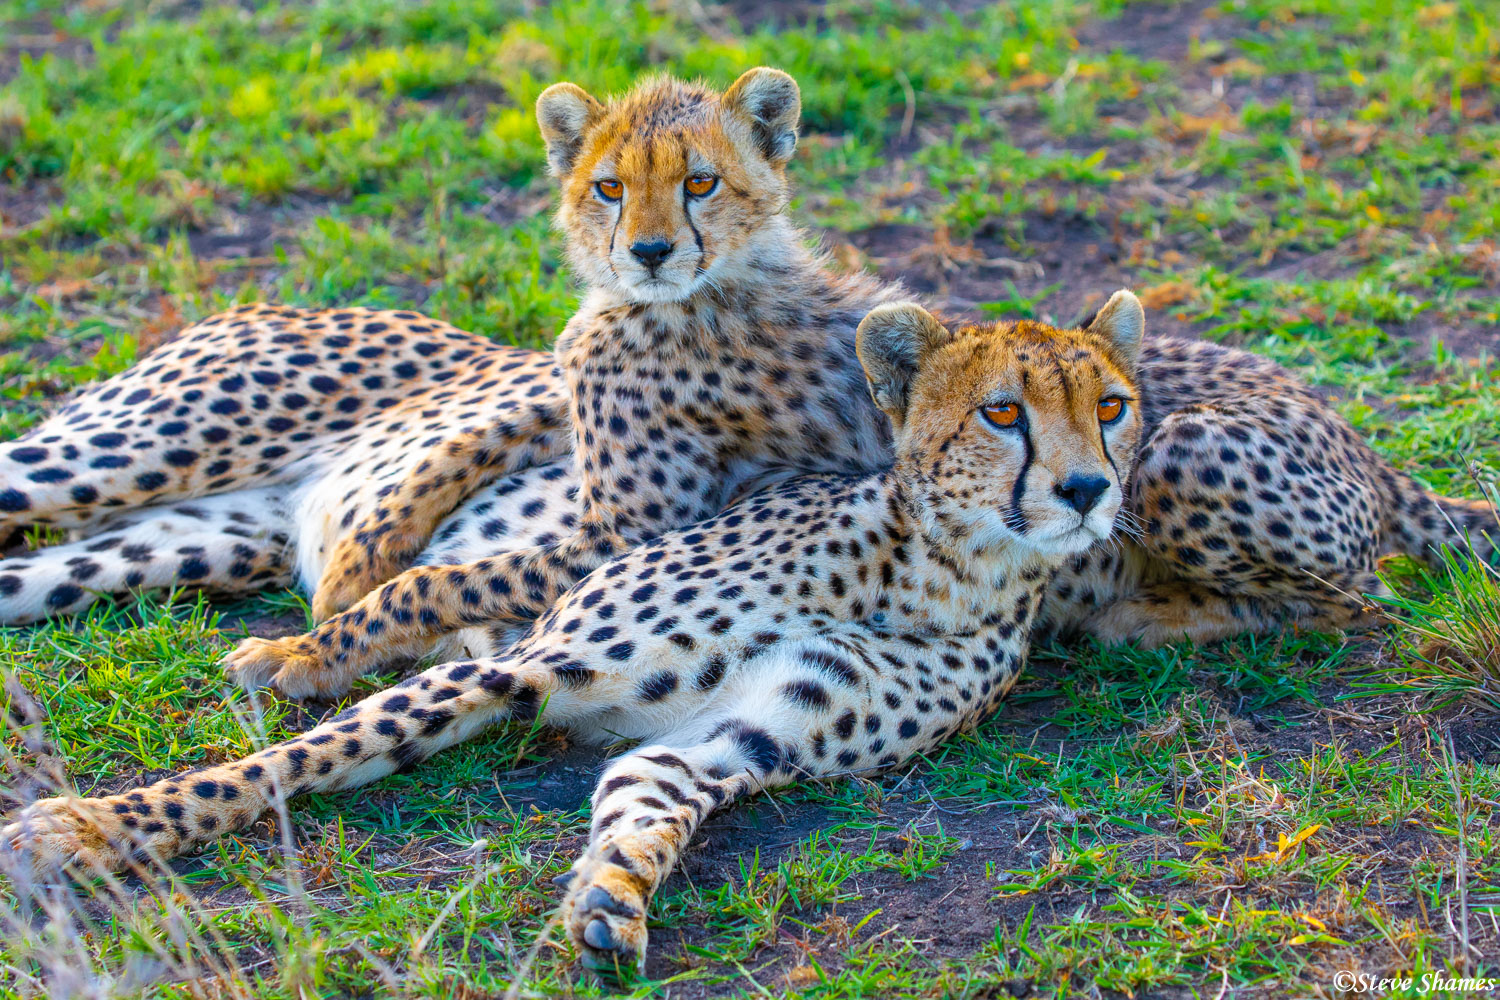 Our favorite mother and son cheetah team. We saw them make three kills after four attempts.